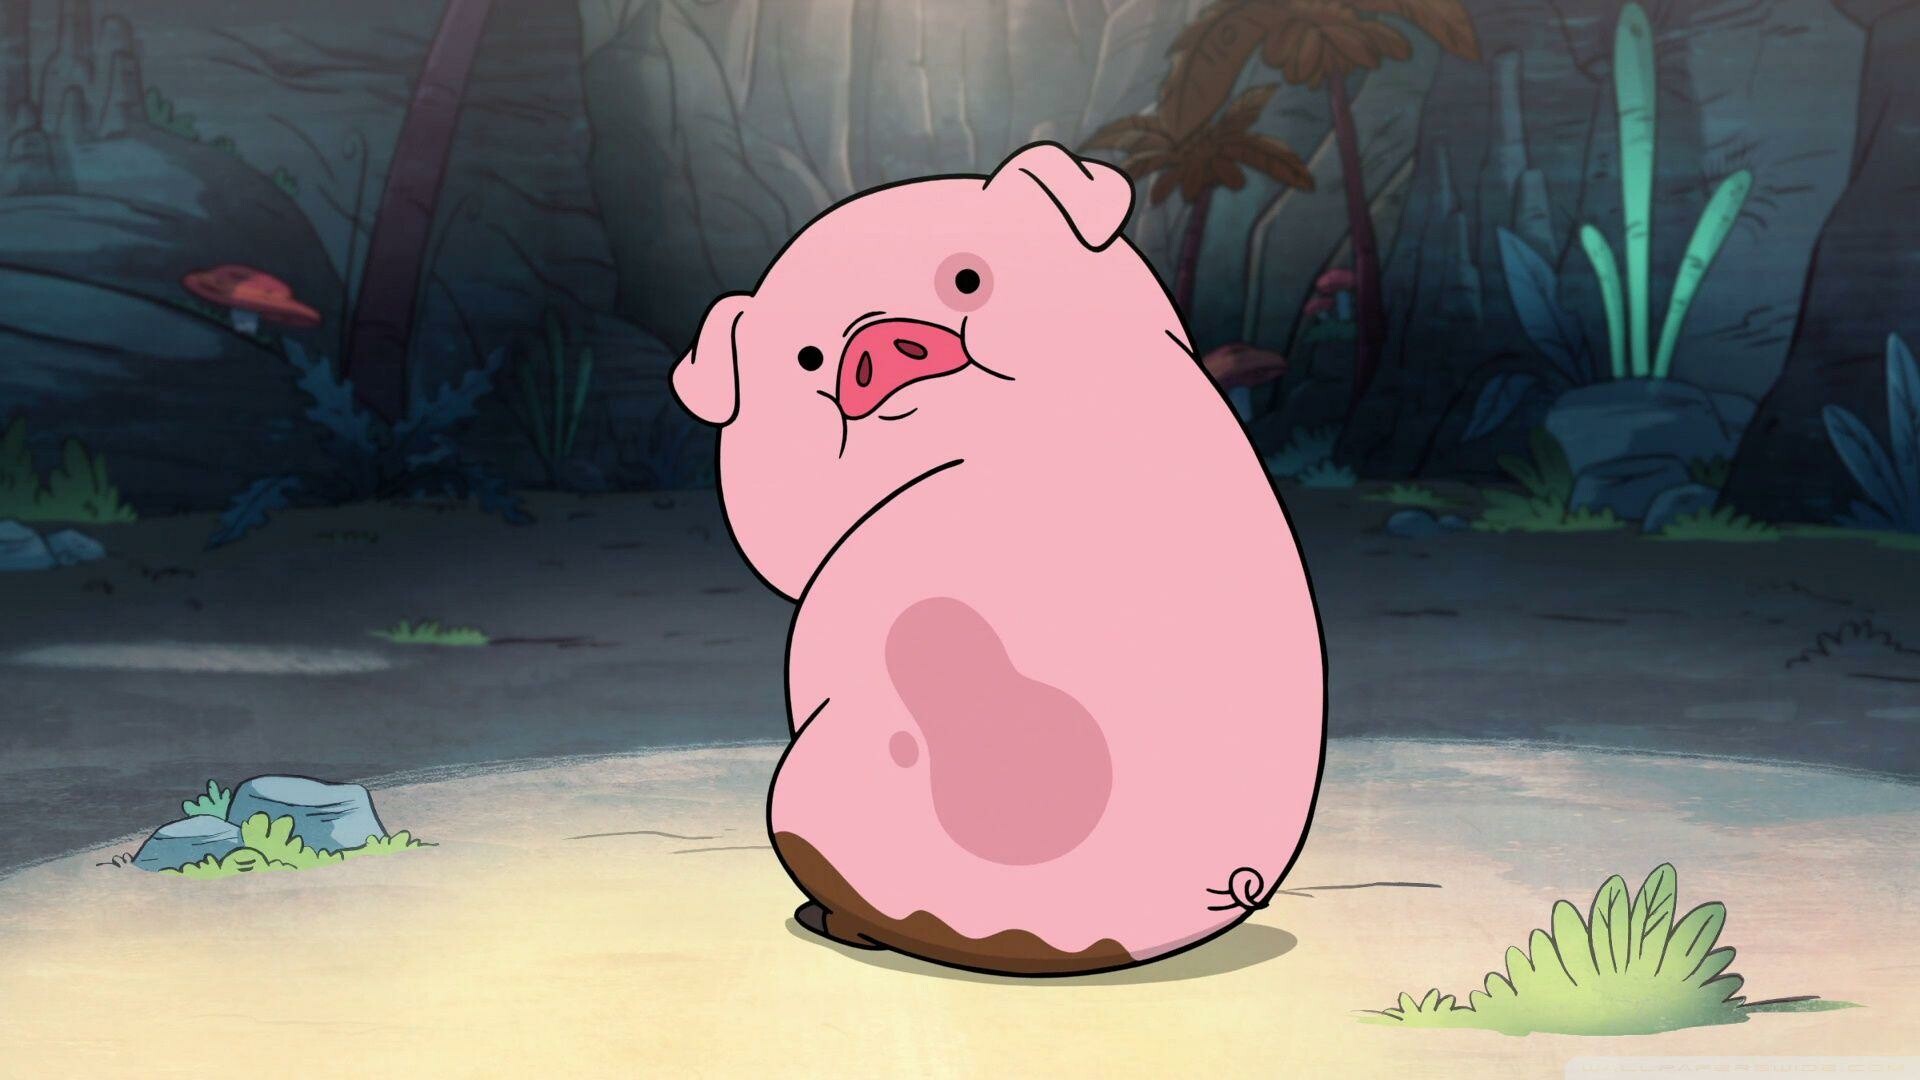 Gravity Falls: Waddles, voiced by Dee Bradley Baker and Neil deGrasse Tyson, Mabel's pet pig. 1920x1080 Full HD Background.